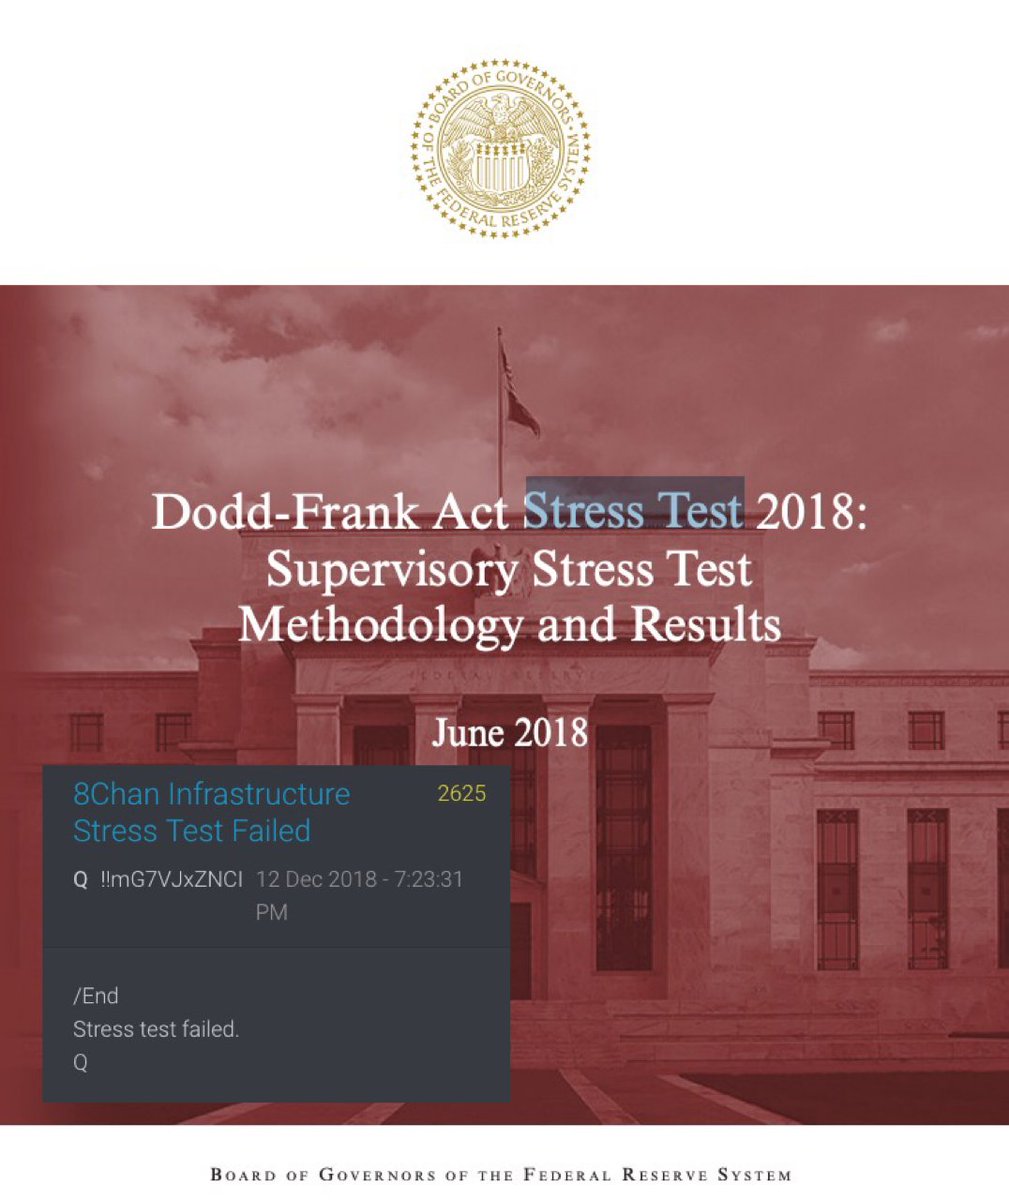 The Dodd-Frank Wall Street Reform & Consumer Protection Act is a massive piece of financial reform legislation passed by the Obama administration in 2010.Dodd-Frank Act Stress Test 2018? https://www.federalreserve.gov/supervisionreg/dfa-stress-tests.htmQ2625/EndStress test failed.Q @POTUS  #QArmy  #PatriotsUnited  #QAnon